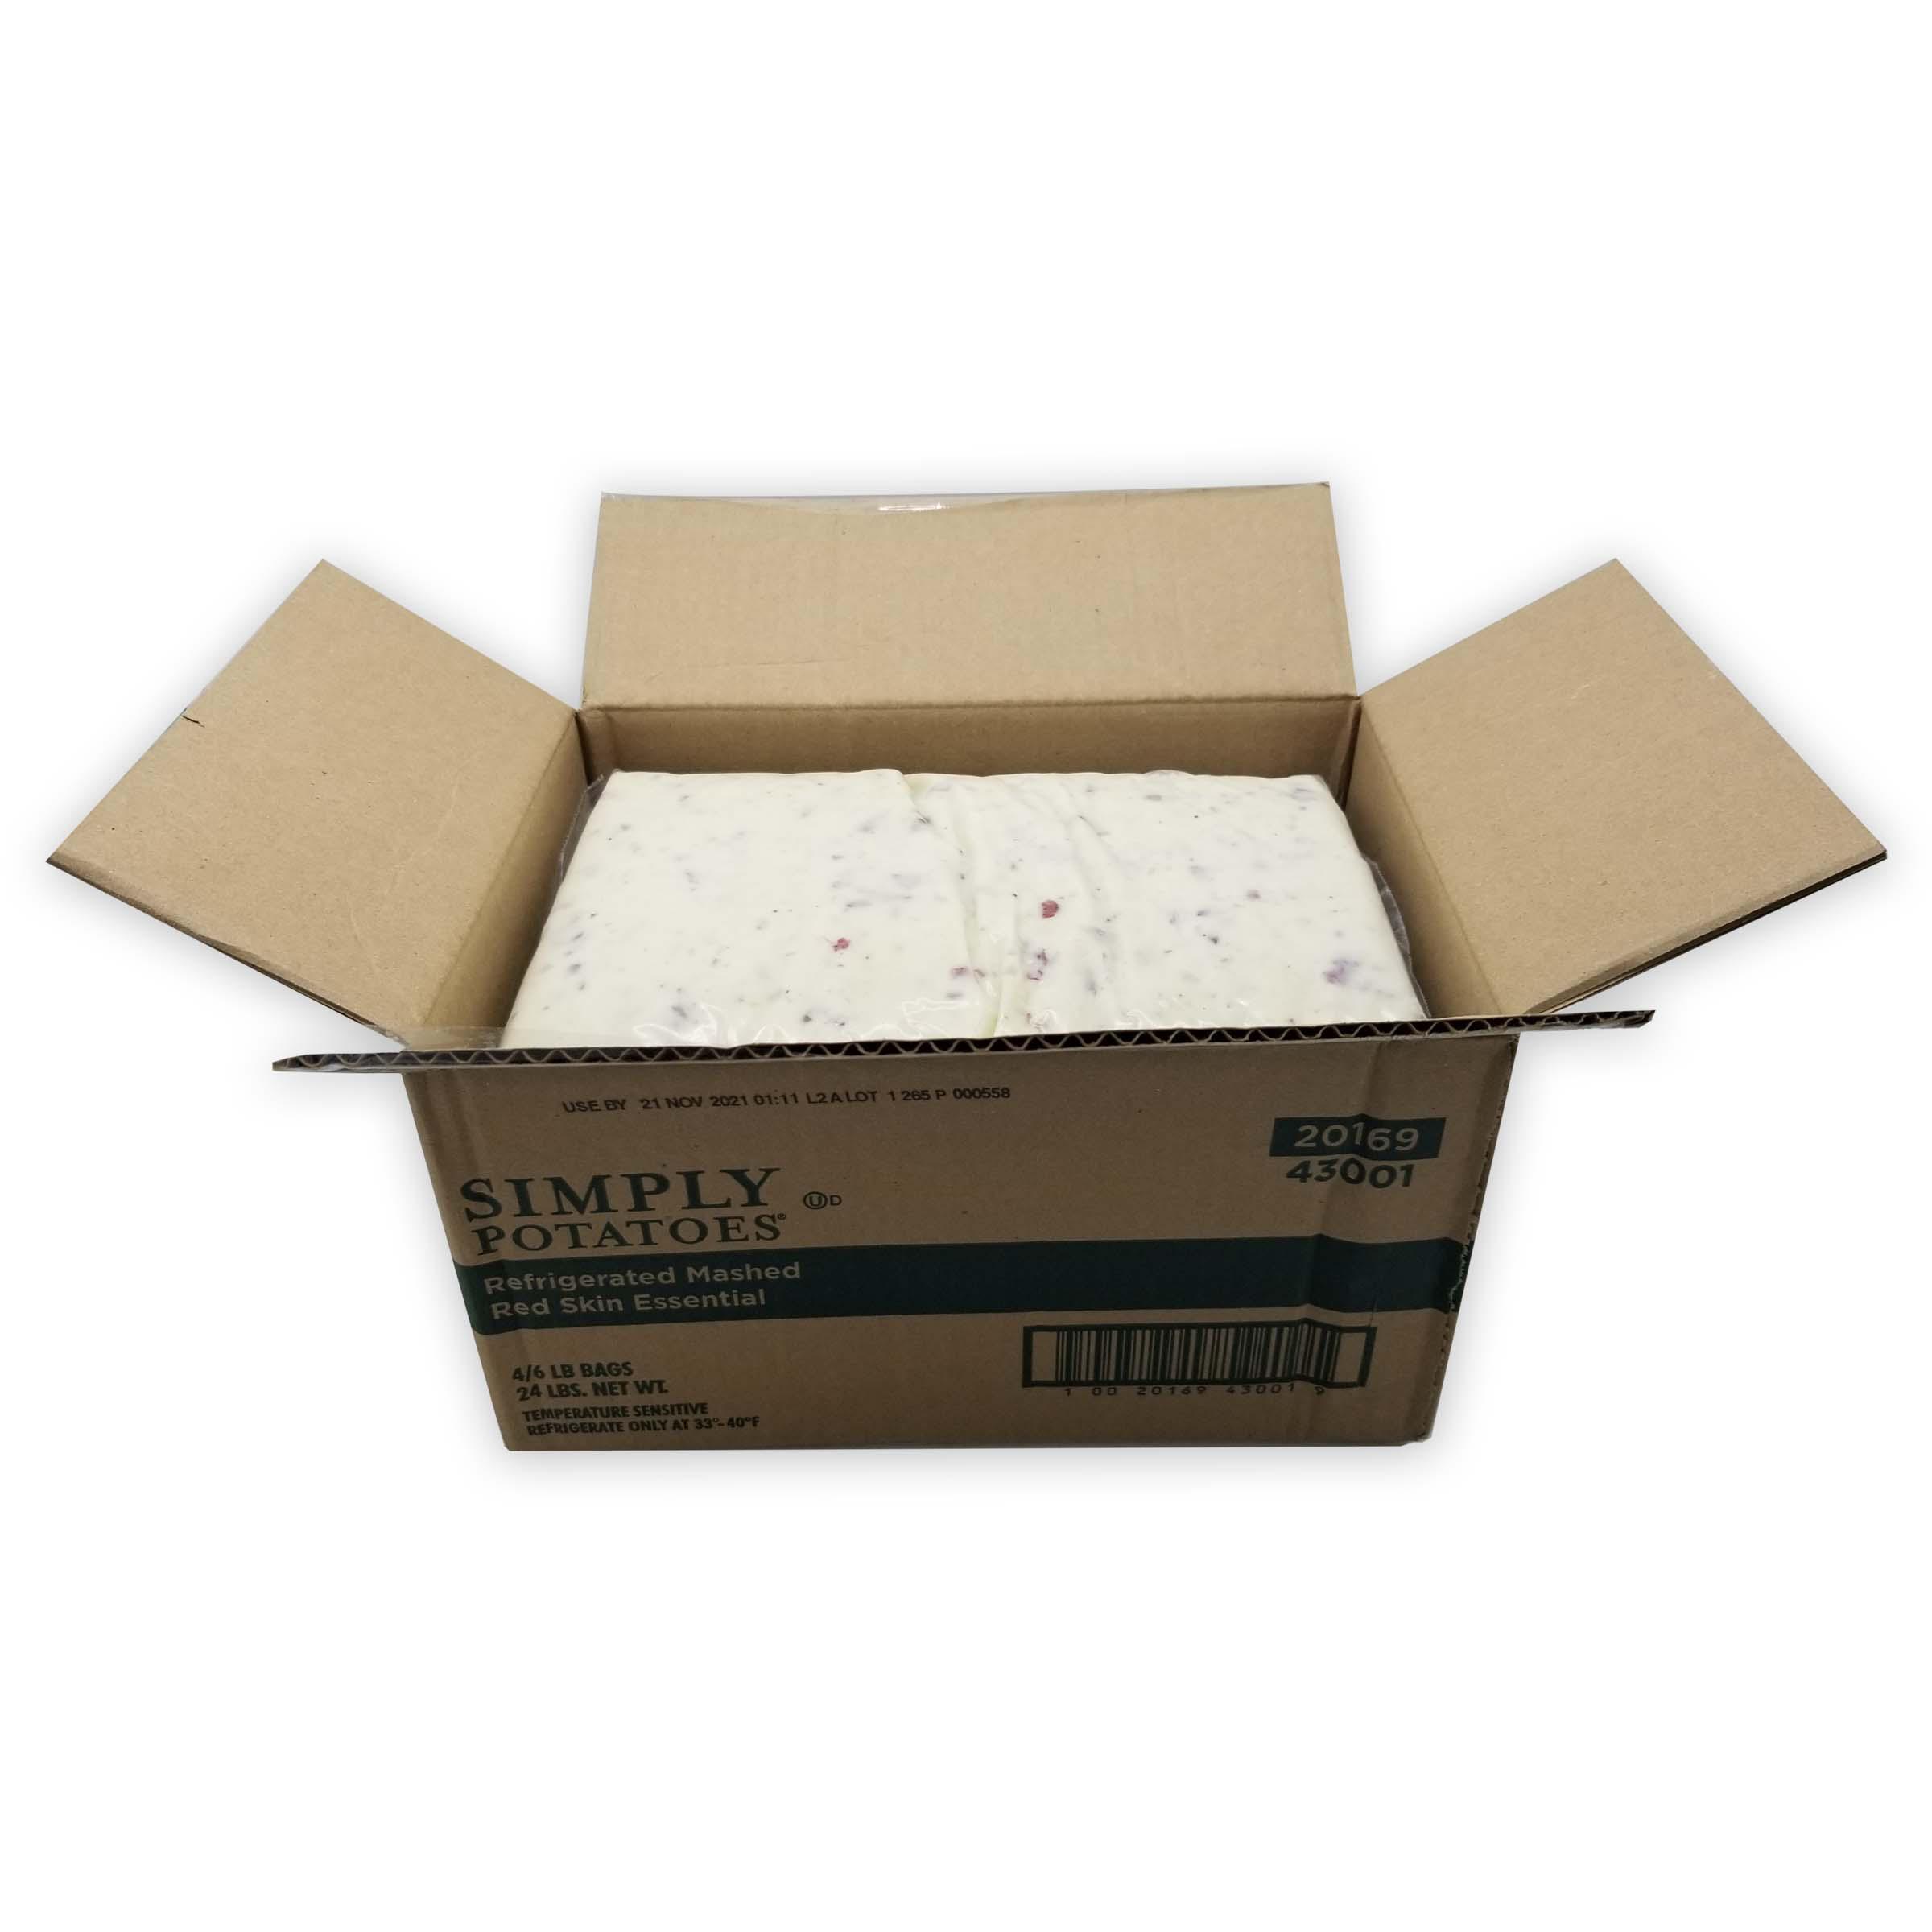 Simply Potatoes® Refrigerated Essential Red Skin Mashed Potatoes made with Red Skin Potatoes, 4/6 lb bags